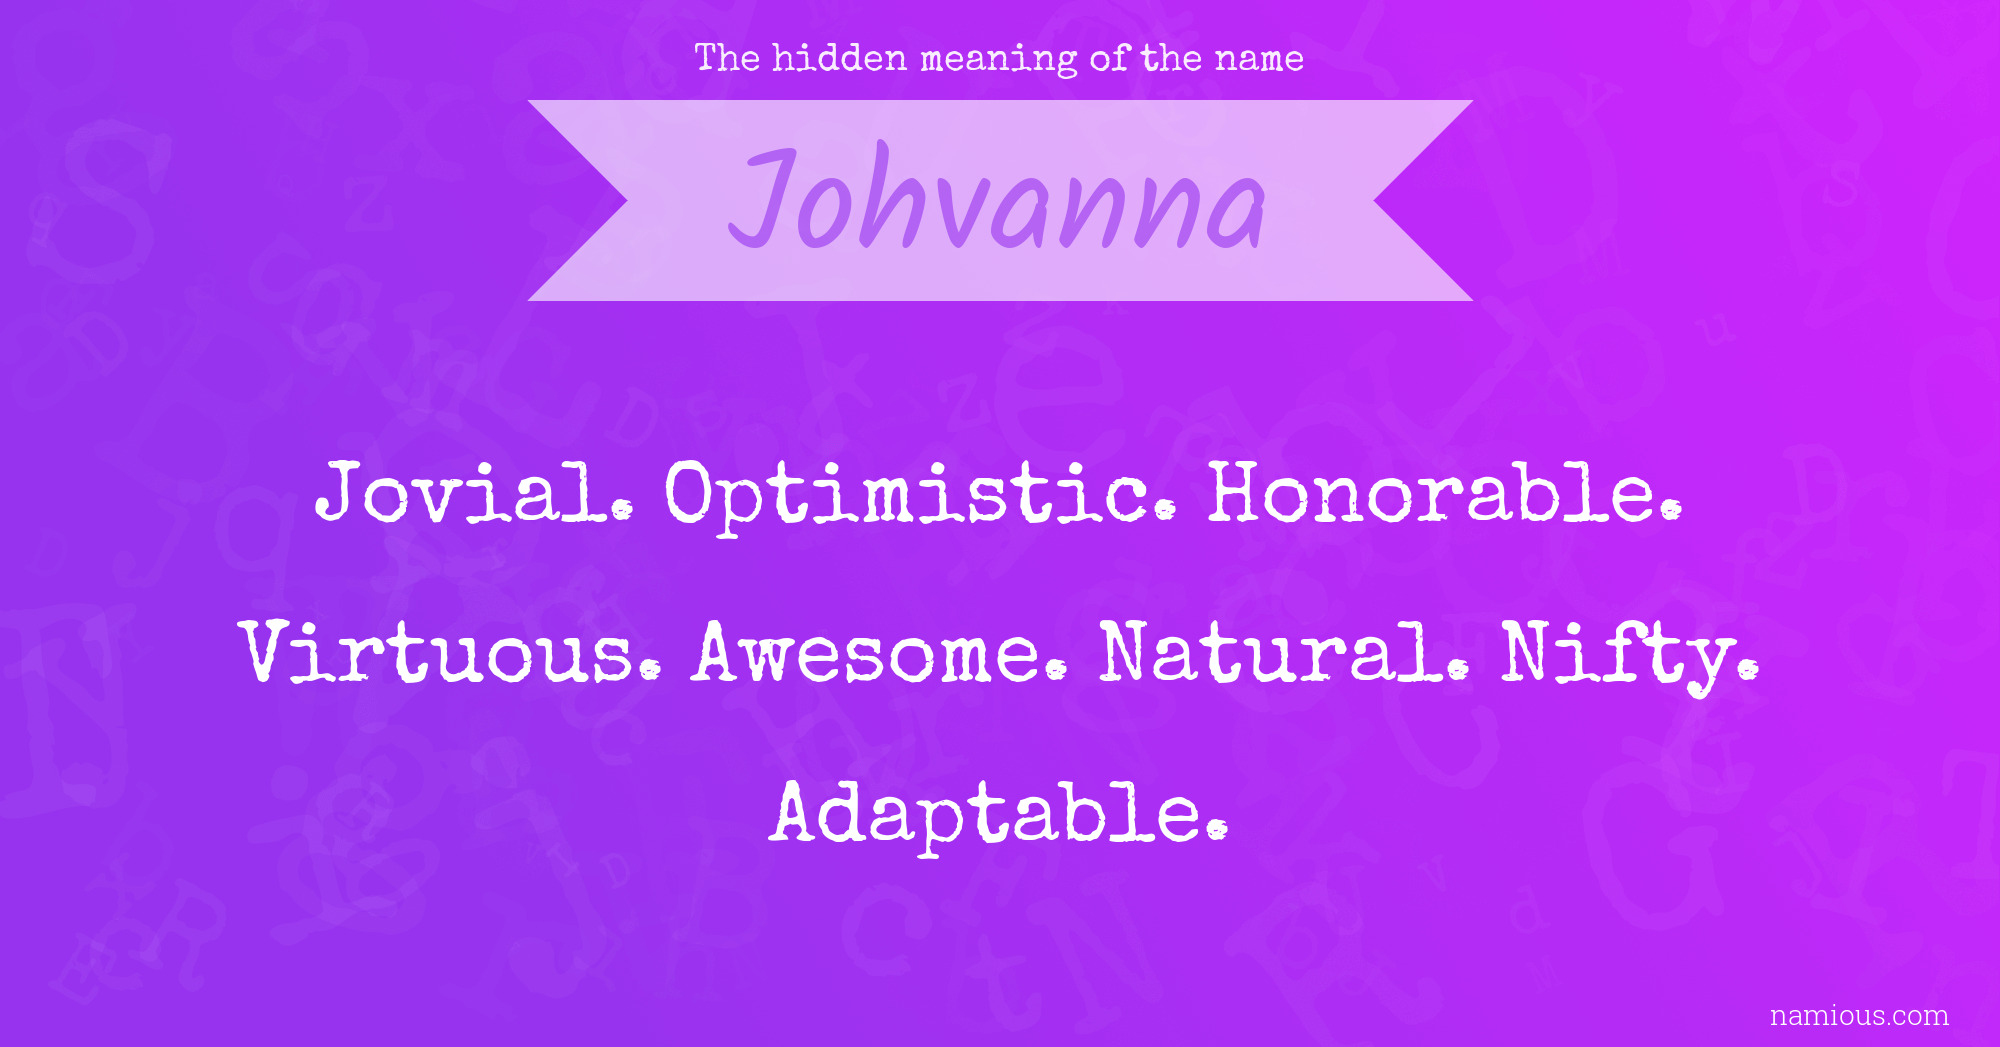 The hidden meaning of the name Johvanna